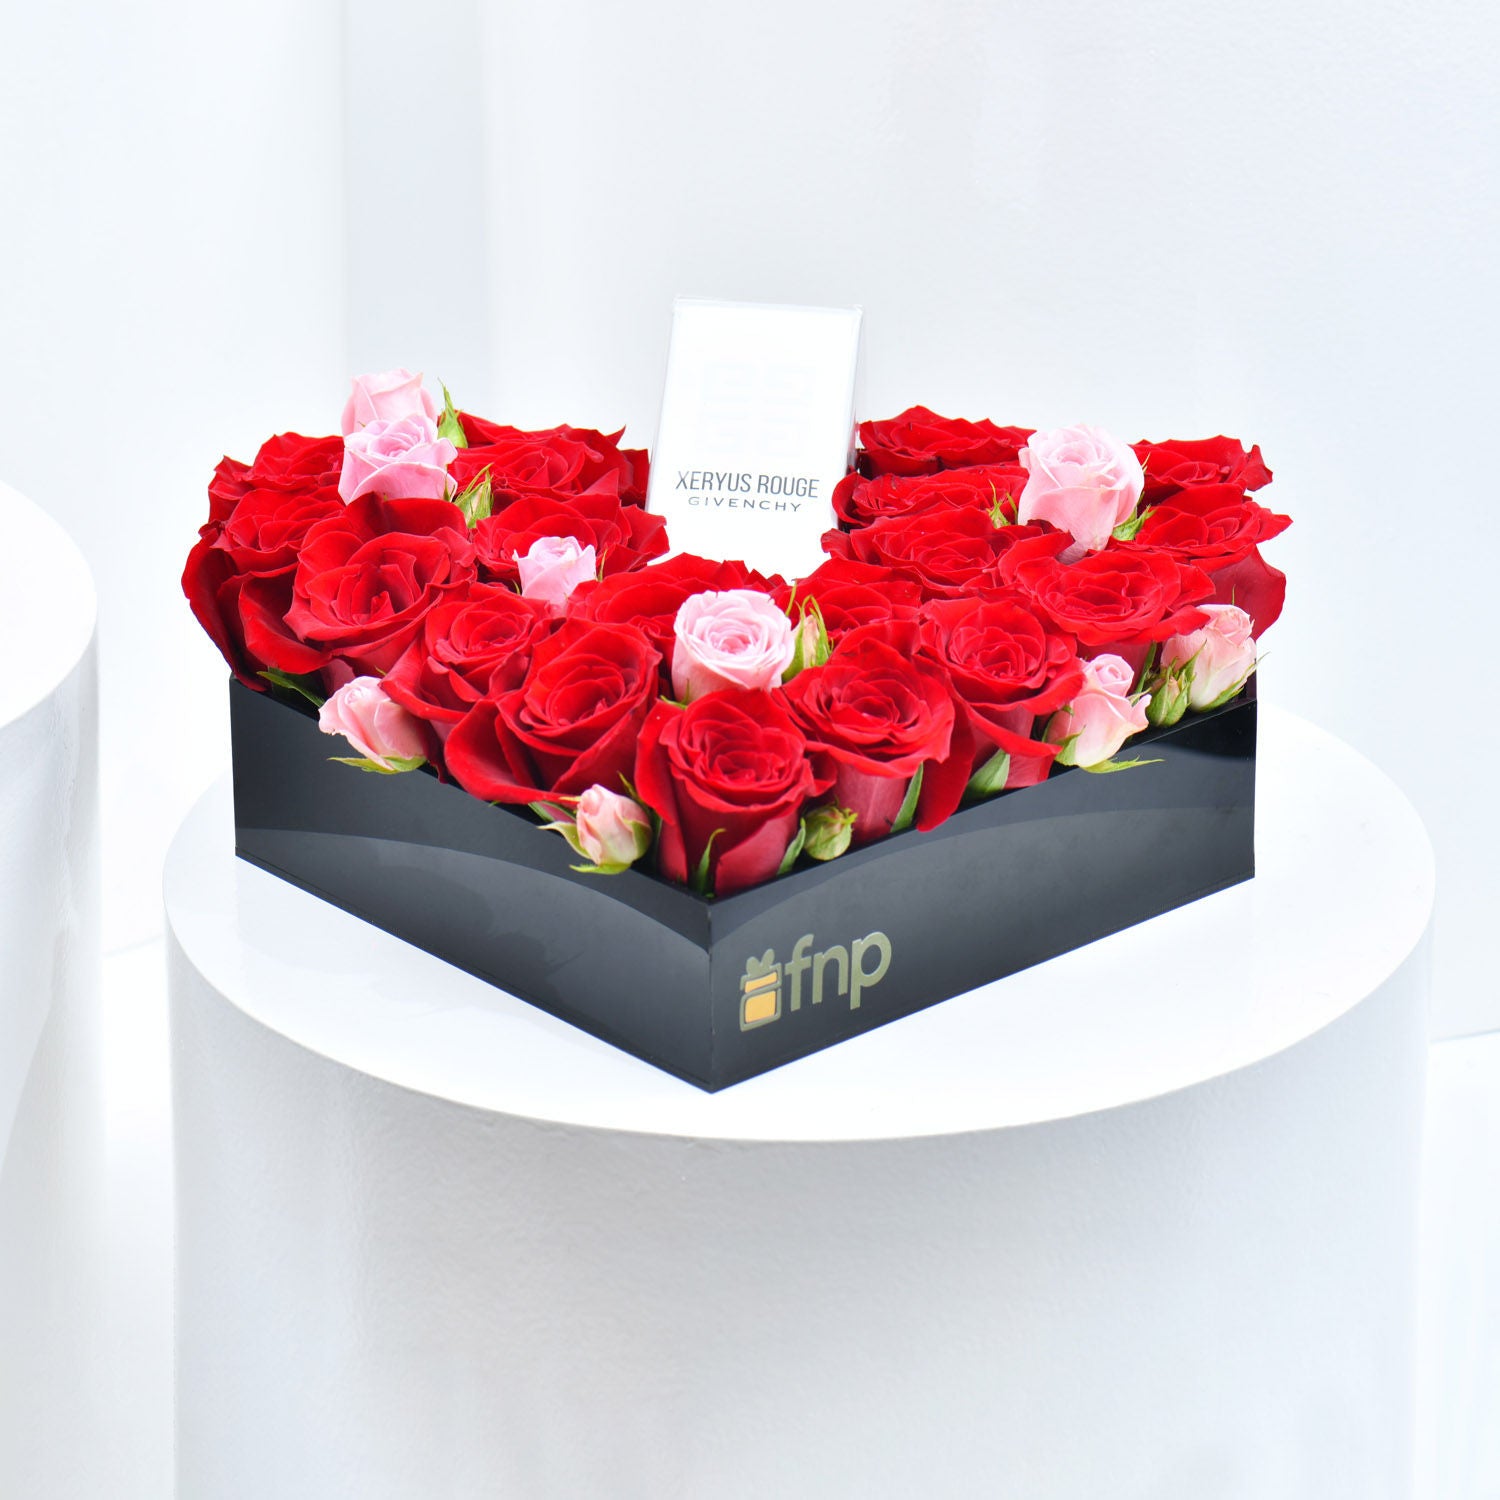 Roses of Love & Xeryus Rouge by Givenchy Perfume for Men